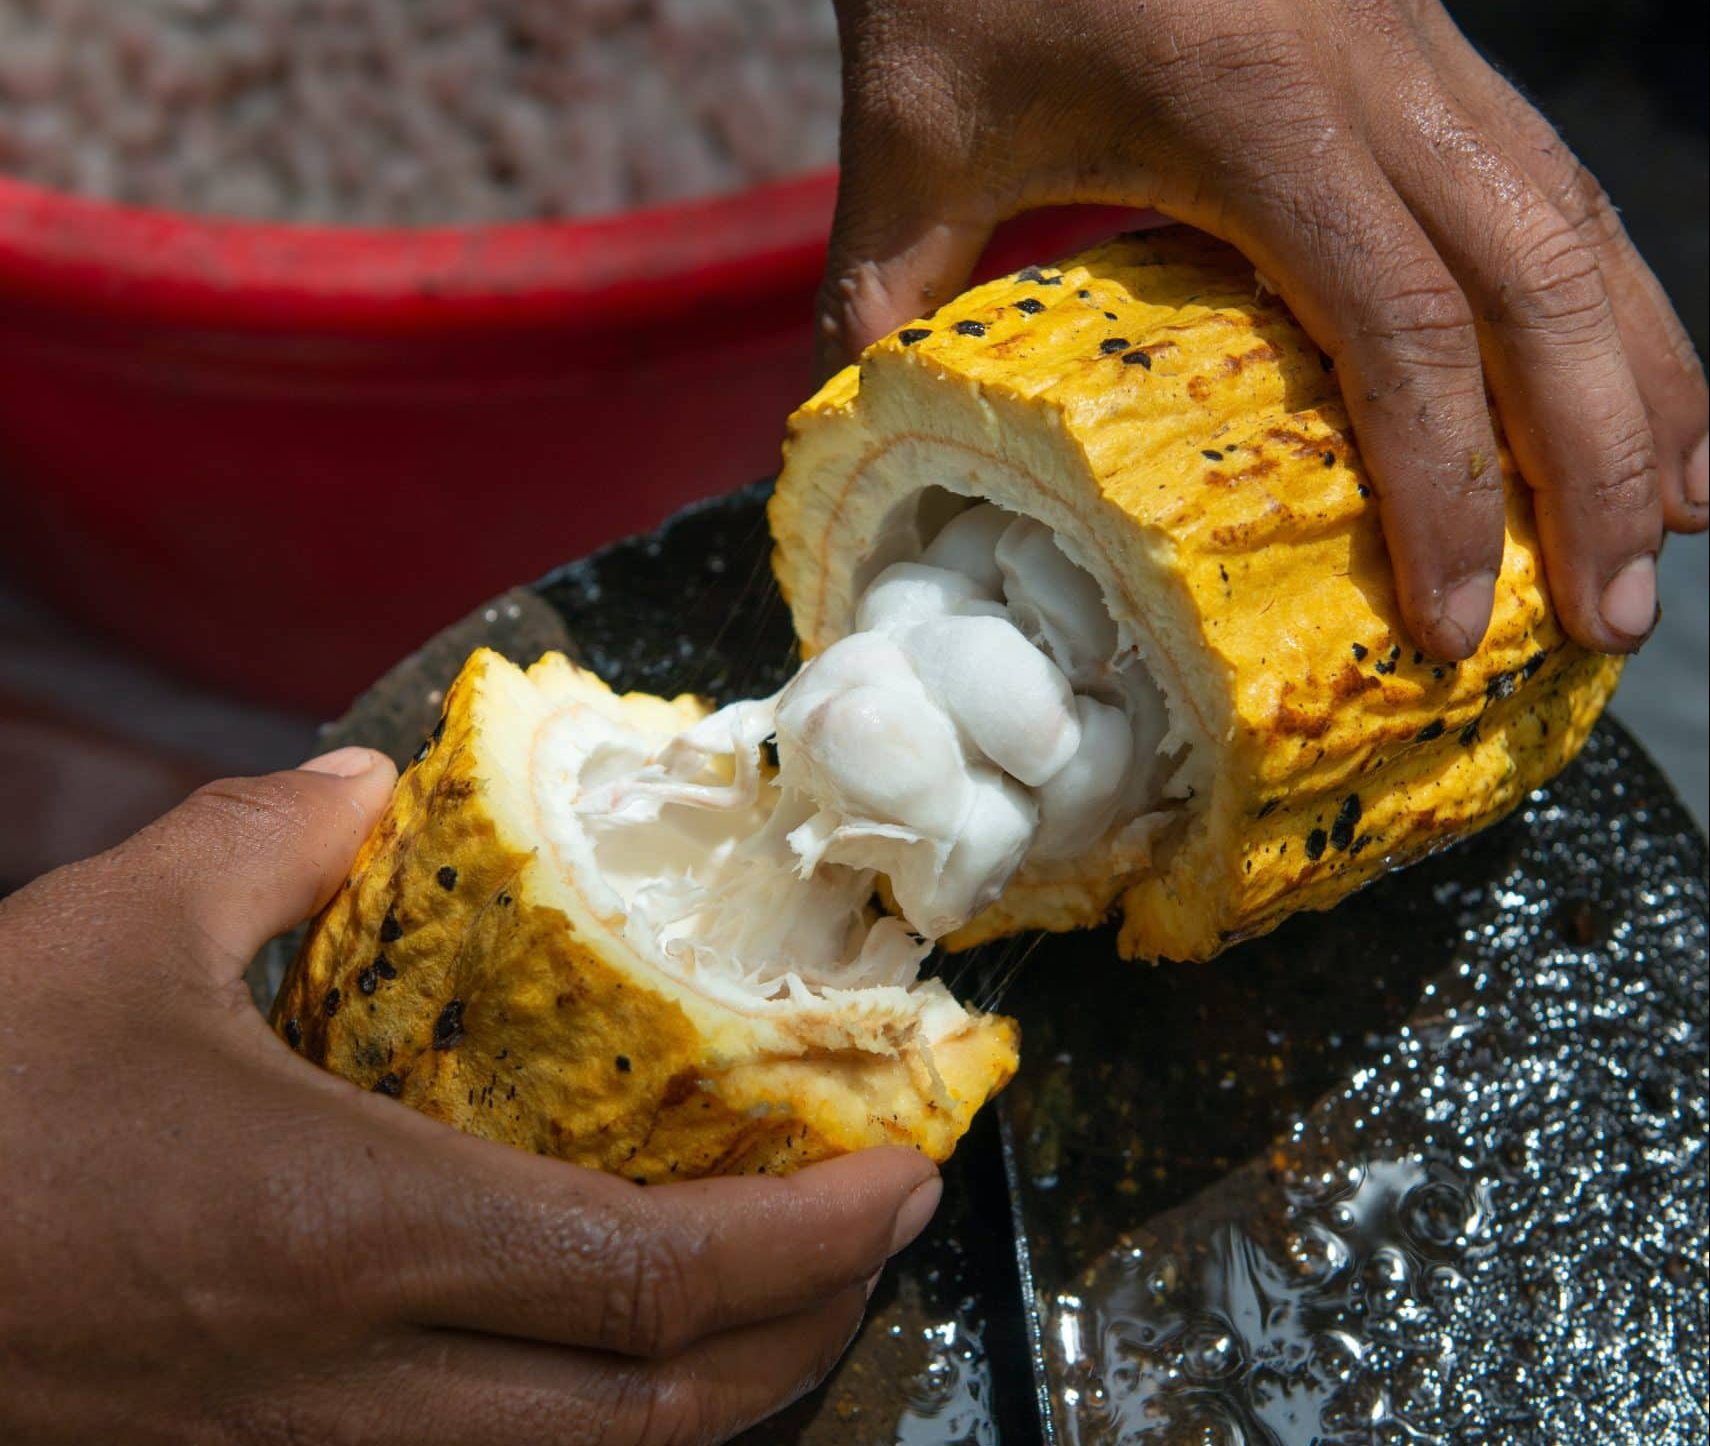 A pod from the Cacao tree is cut in half, showing the fresh cacao beans inside. The beans are joined in the center, convered in a white film, a part of the fruit.